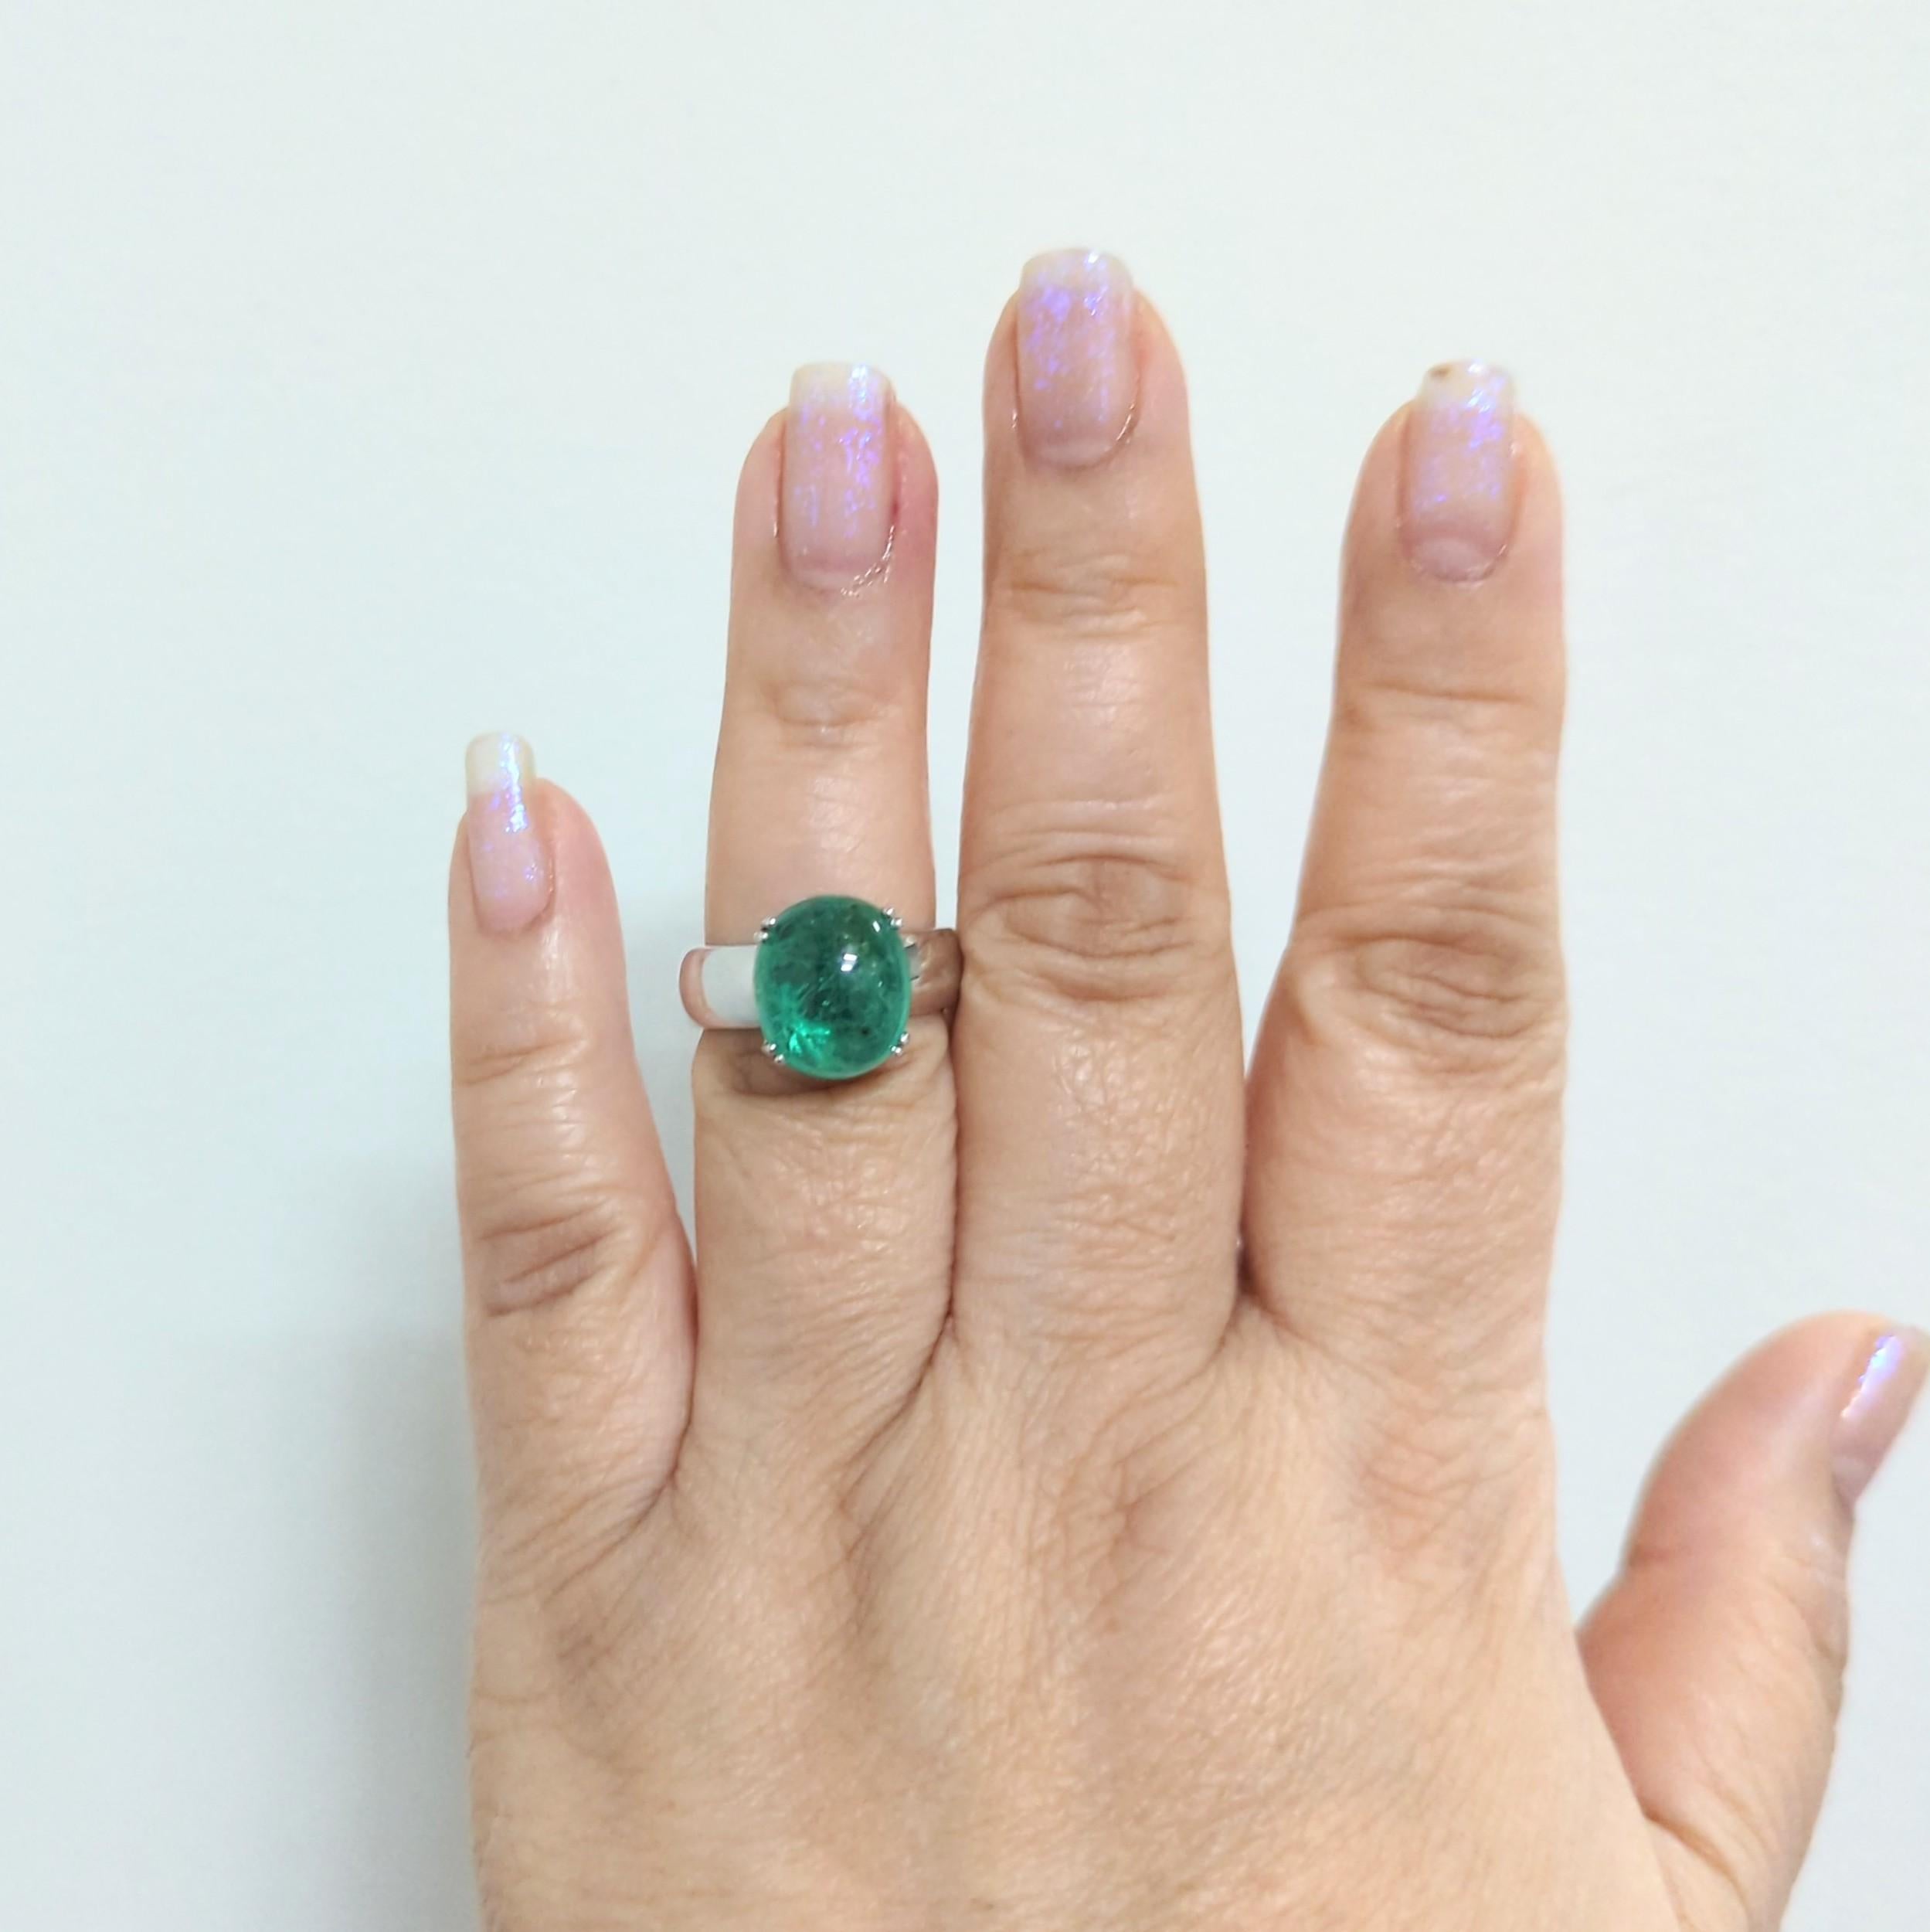 Beautiful 7.42 ct. emerald oval cabochon.  Handmade in 14k white gold.  Ring size 7.5.